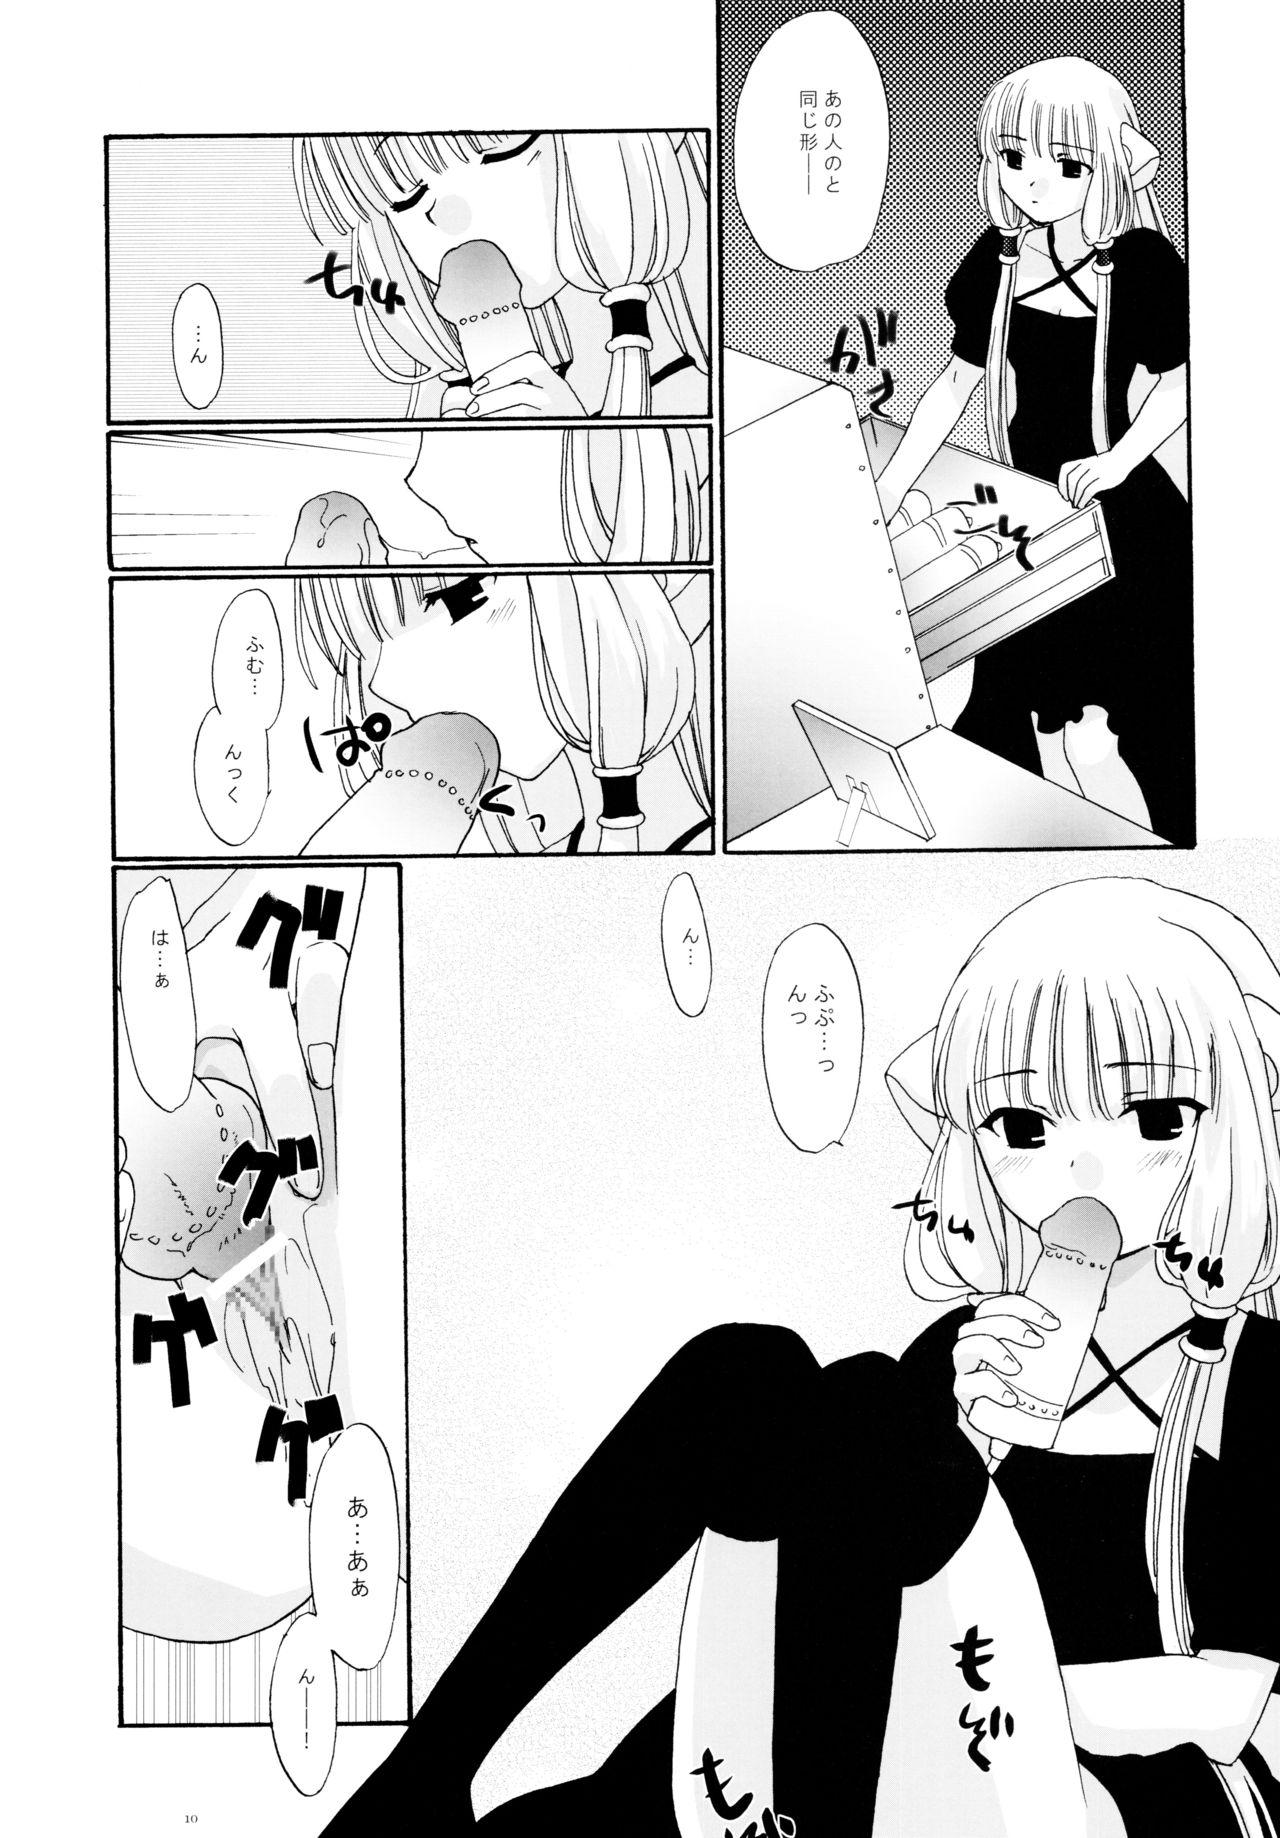 Tiny Tits Porn Intentia - Chobits Climax - Page 10